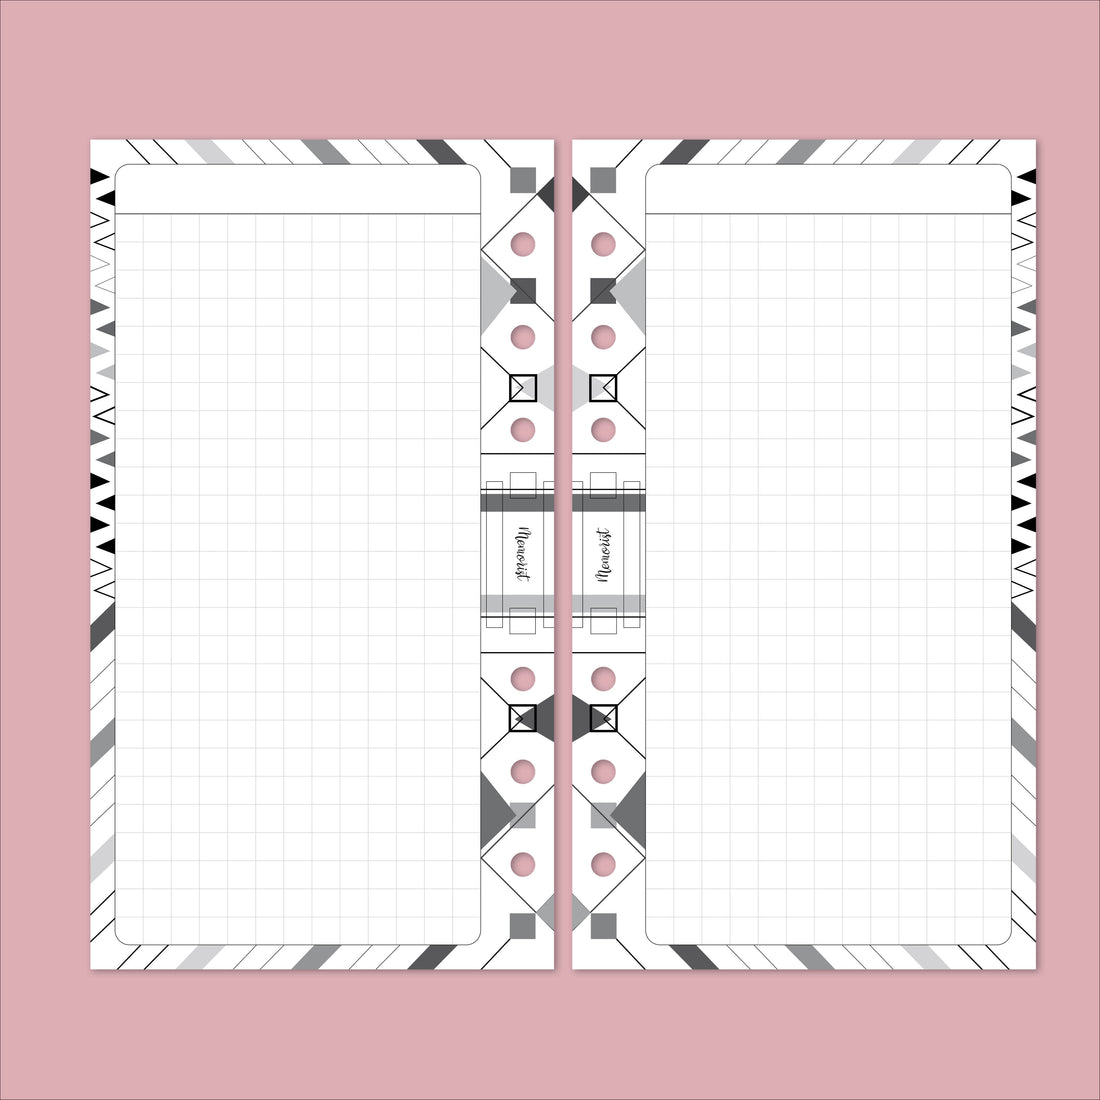 Design Grid: Pattern 001 (Personal Size)